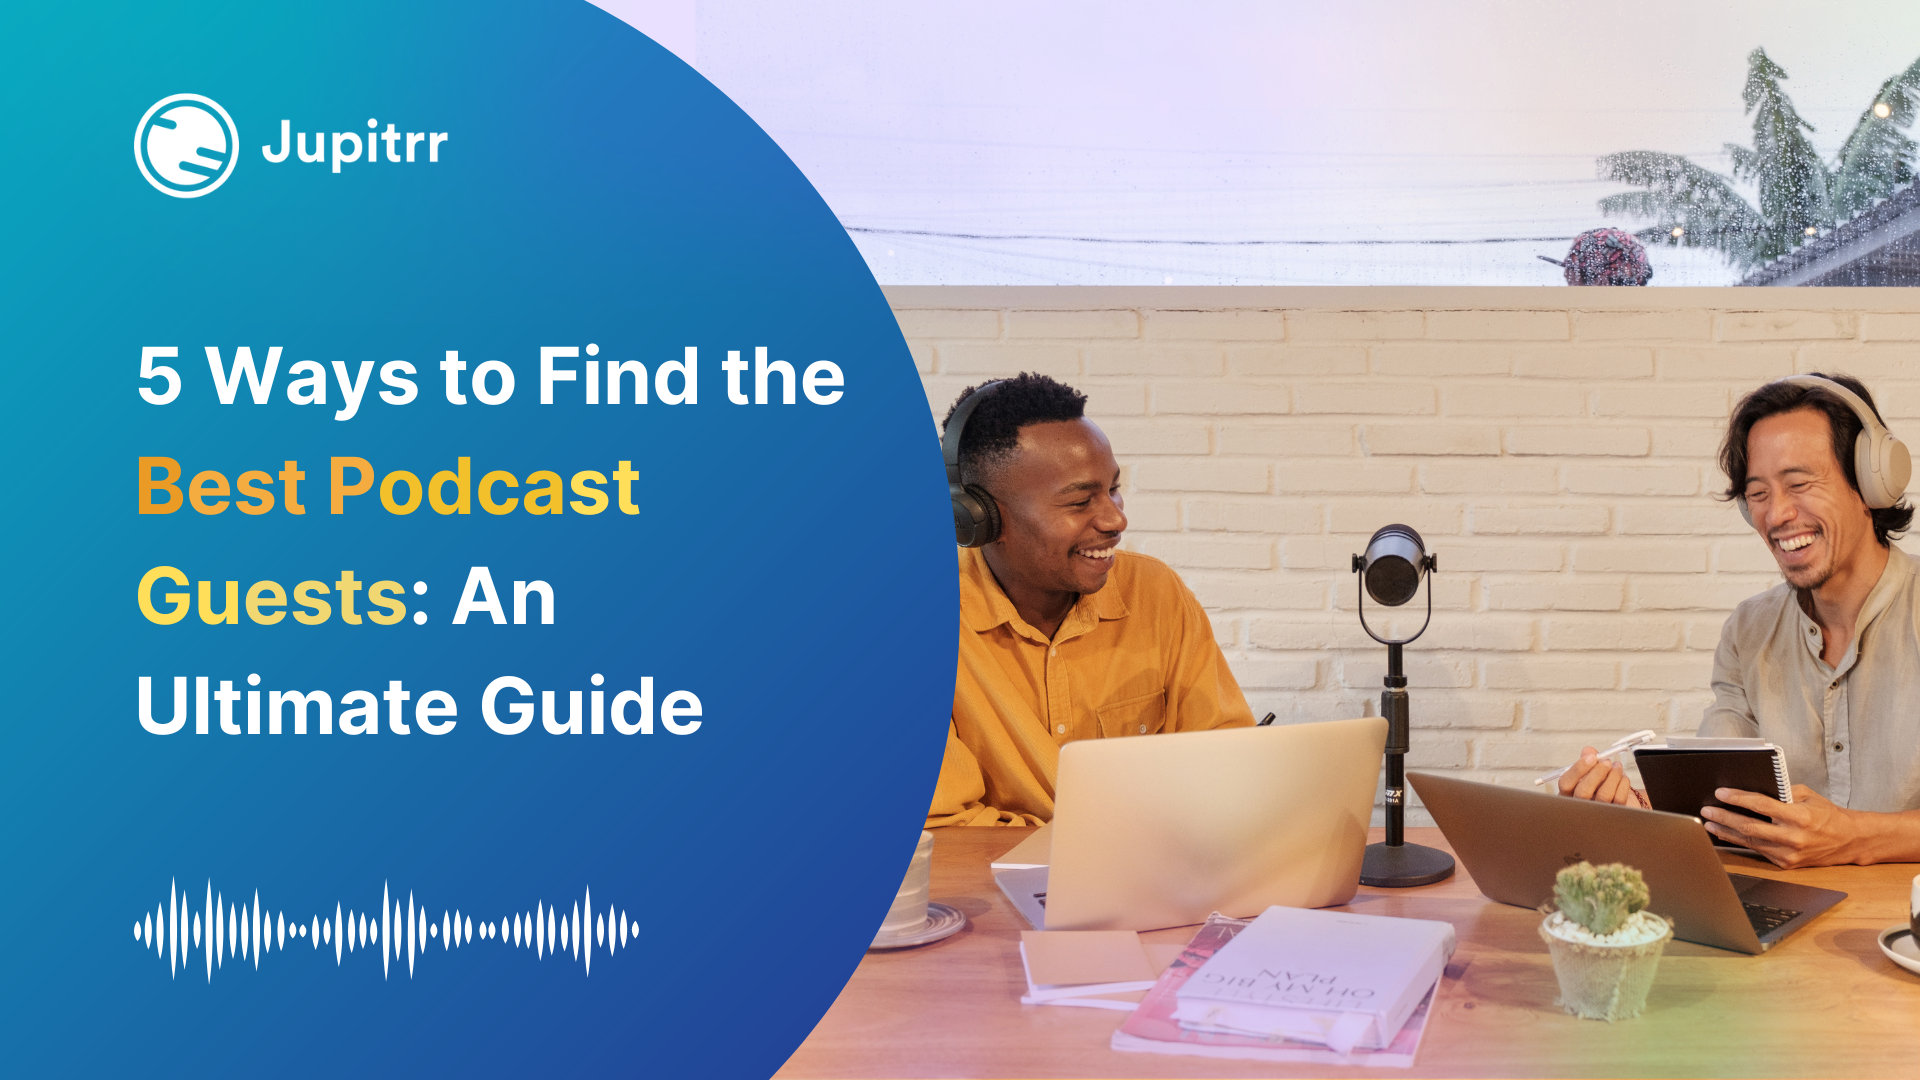 How to Find Podcast Guests?